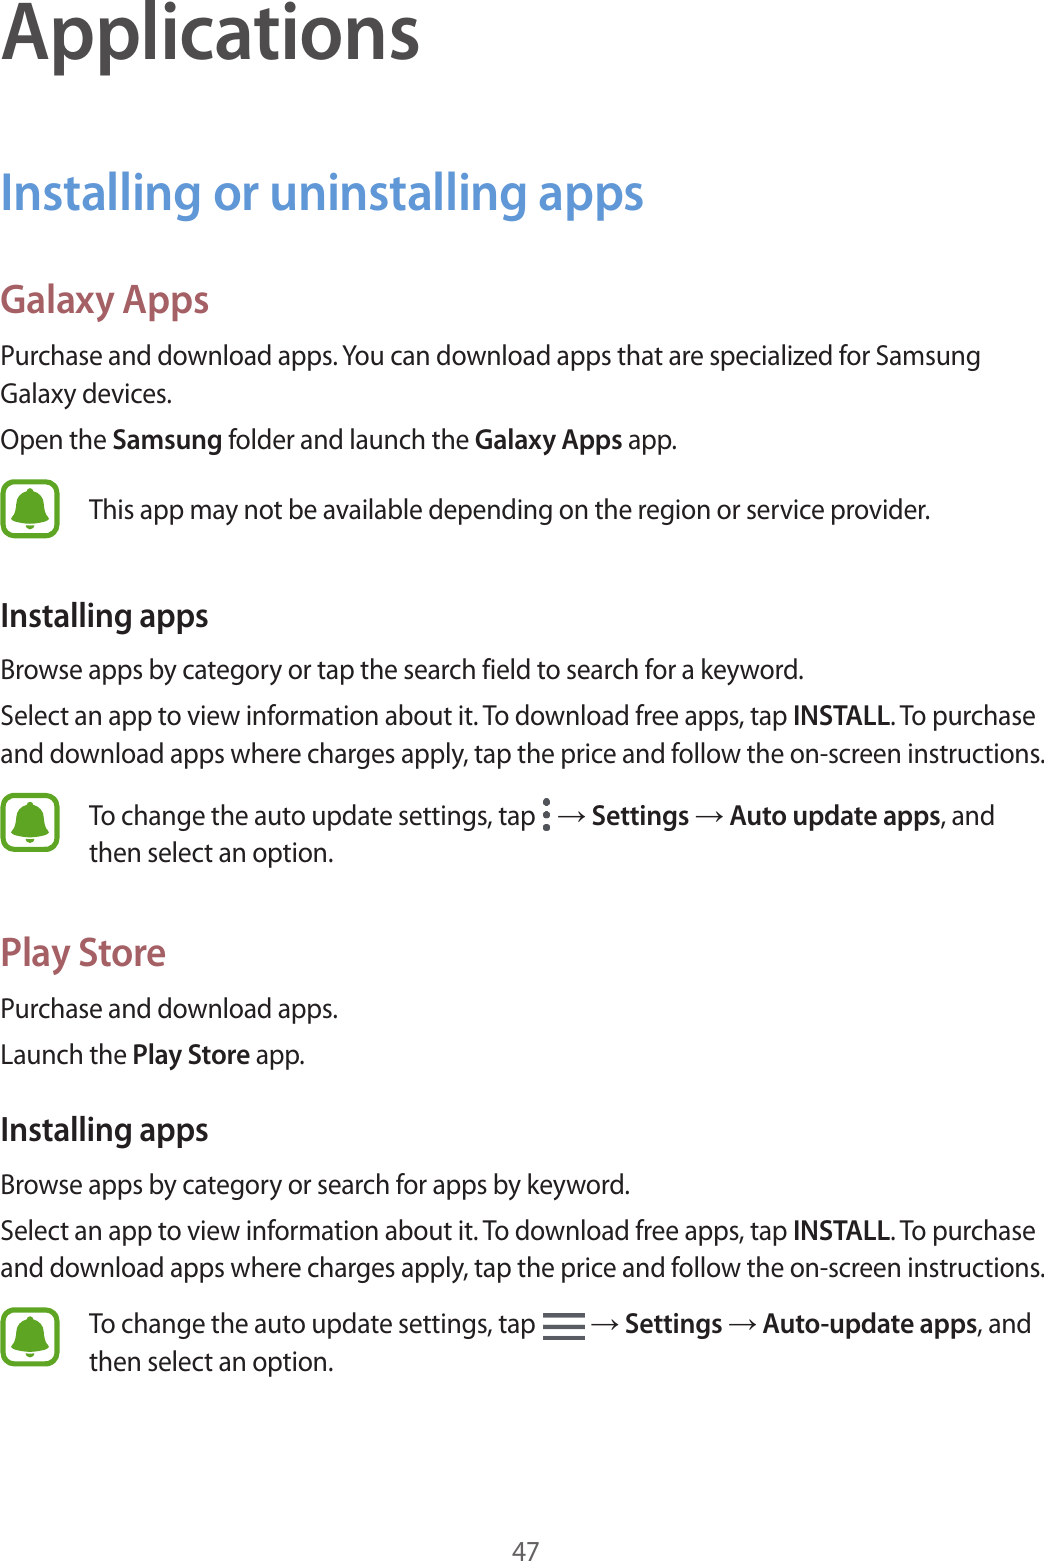 47ApplicationsInstalling or uninstalling appsGalaxy AppsPurchase and download apps. You can download apps that are specialized for Samsung Galaxy devices.Open the Samsung folder and launch the Galaxy Apps app.This app may not be available depending on the region or service provider.Installing appsBrowse apps by category or tap the search field to search for a keyword.Select an app to view information about it. To download free apps, tap INSTALL. To purchase and download apps where charges apply, tap the price and follow the on-screen instructions.To change the auto update settings, tap   → Settings → Auto update apps, and then select an option.Play StorePurchase and download apps.Launch the Play Store app.Installing appsBrowse apps by category or search for apps by keyword.Select an app to view information about it. To download free apps, tap INSTALL. To purchase and download apps where charges apply, tap the price and follow the on-screen instructions.To change the auto update settings, tap   → Settings → Auto-update apps, and then select an option.